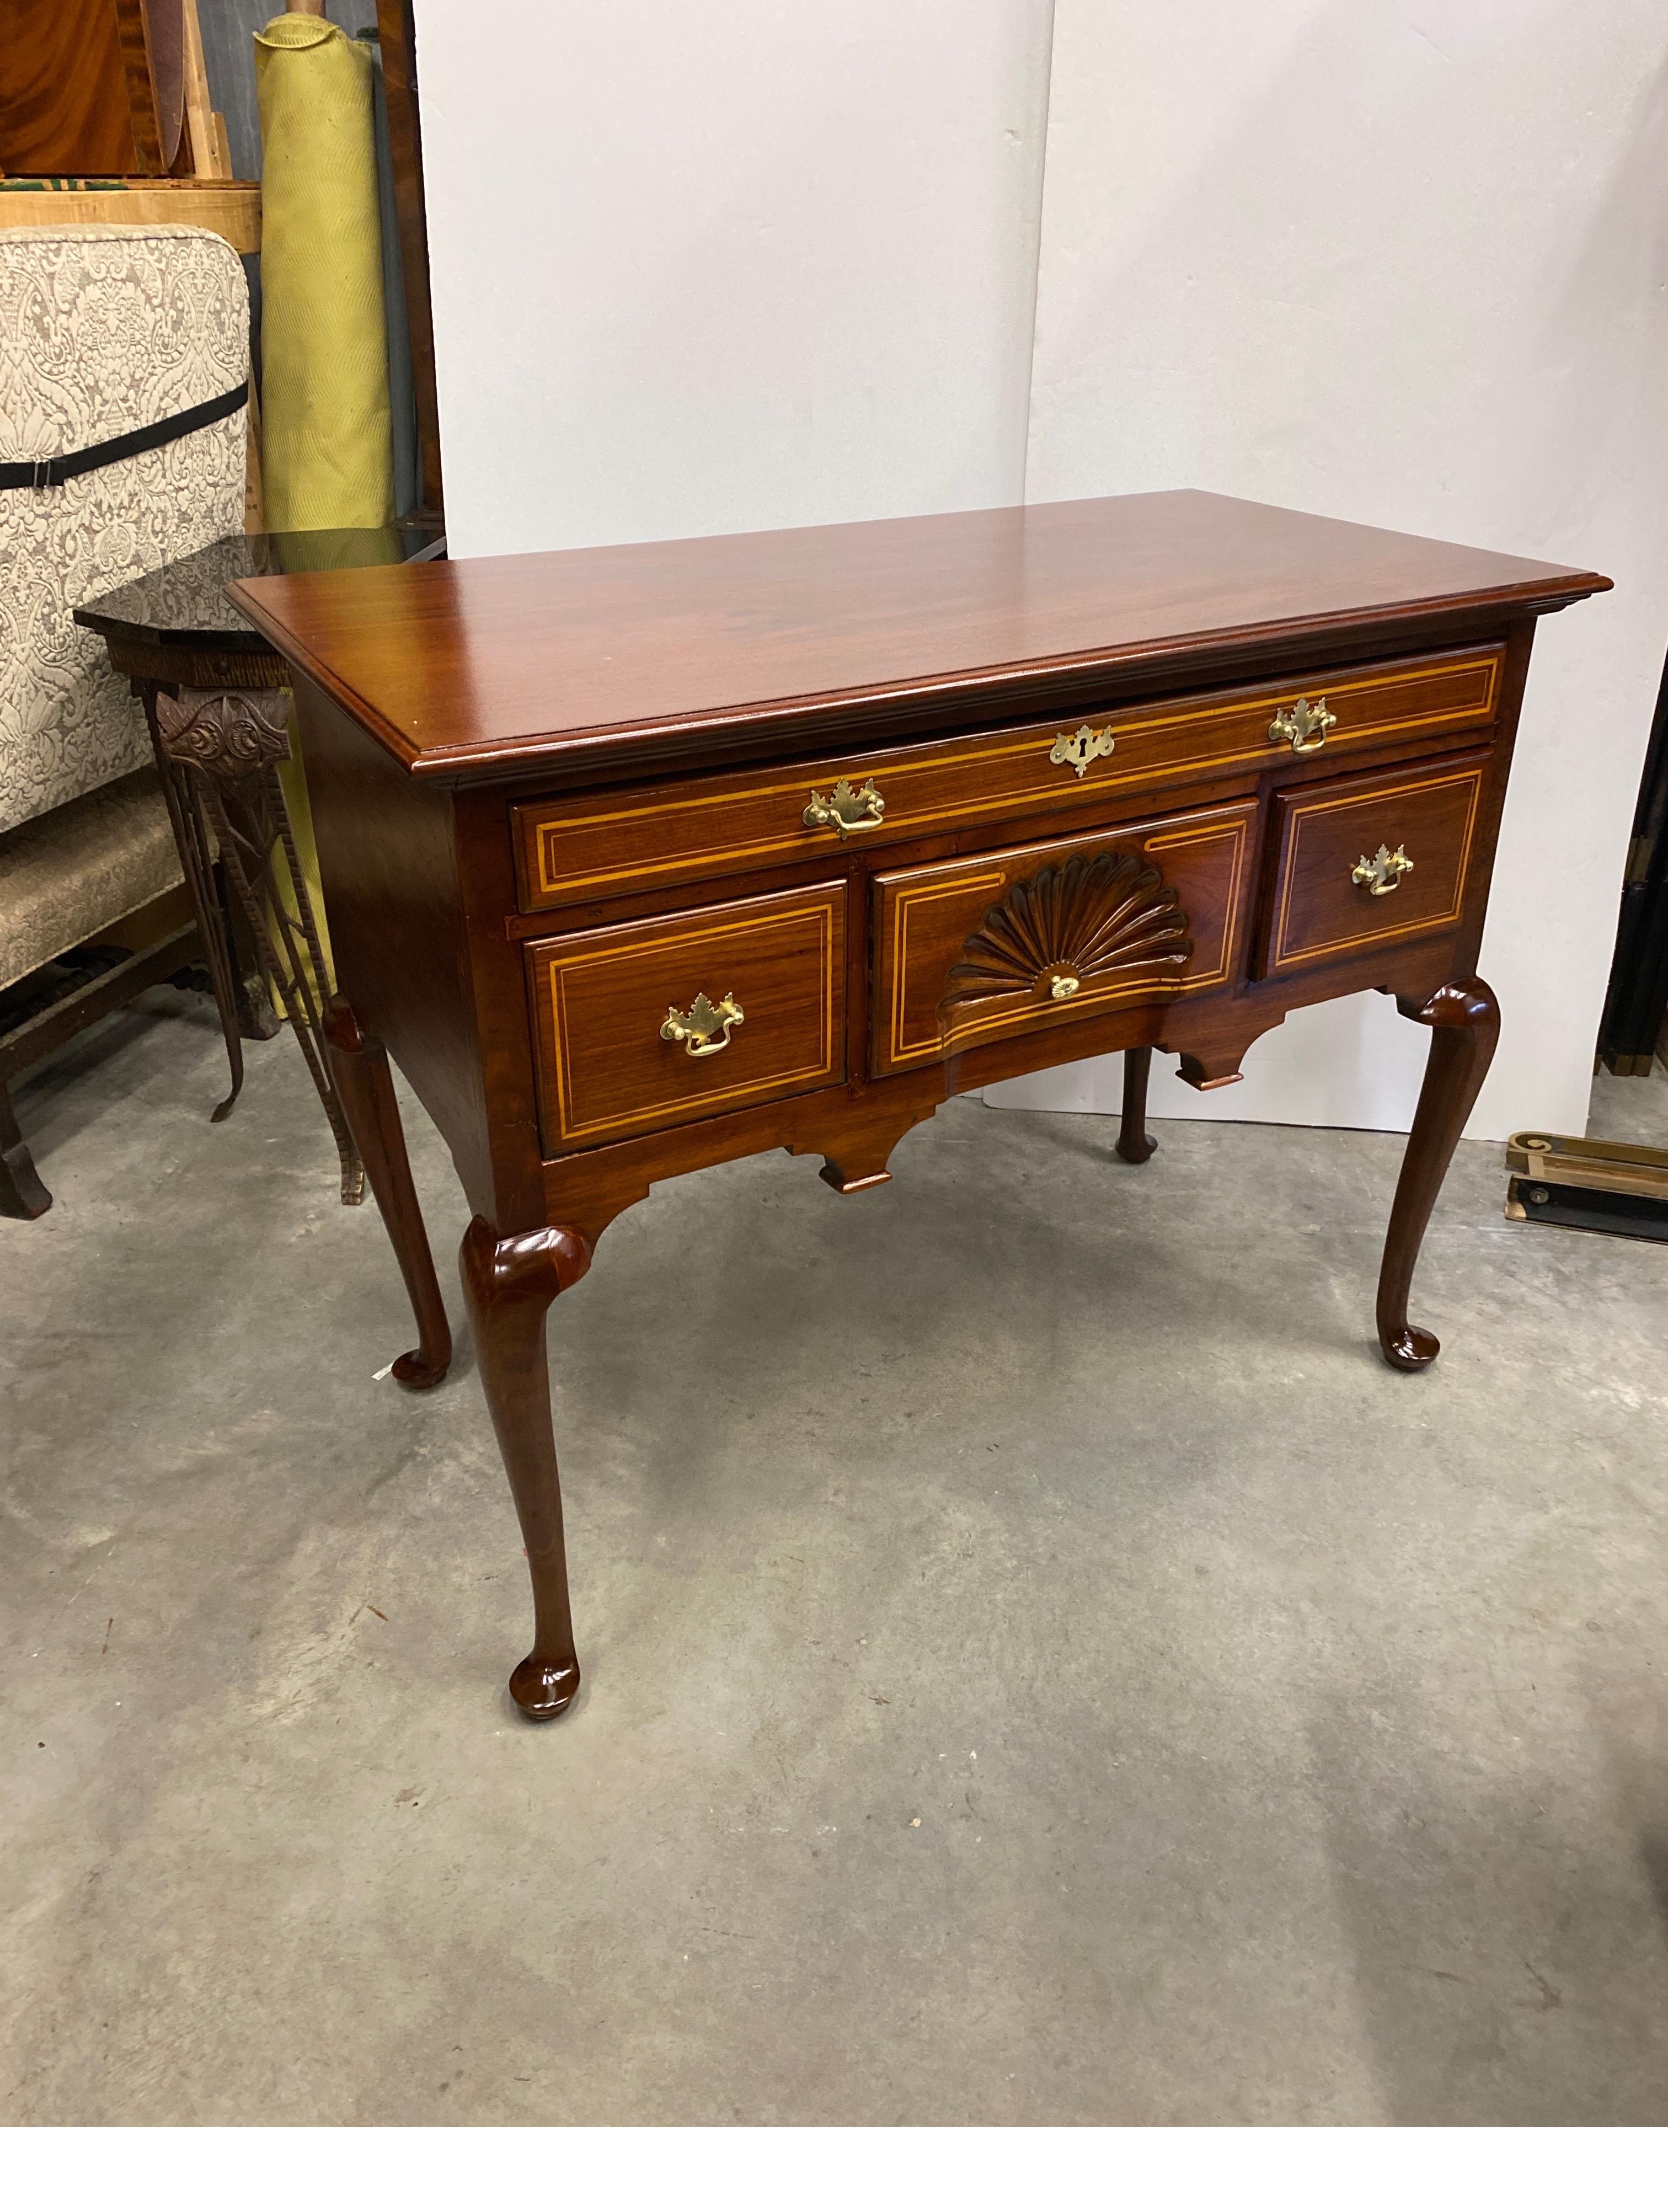 Early 19th Century Solid Cherry Inlaid Lowboy, Circa 1800 For Sale 4